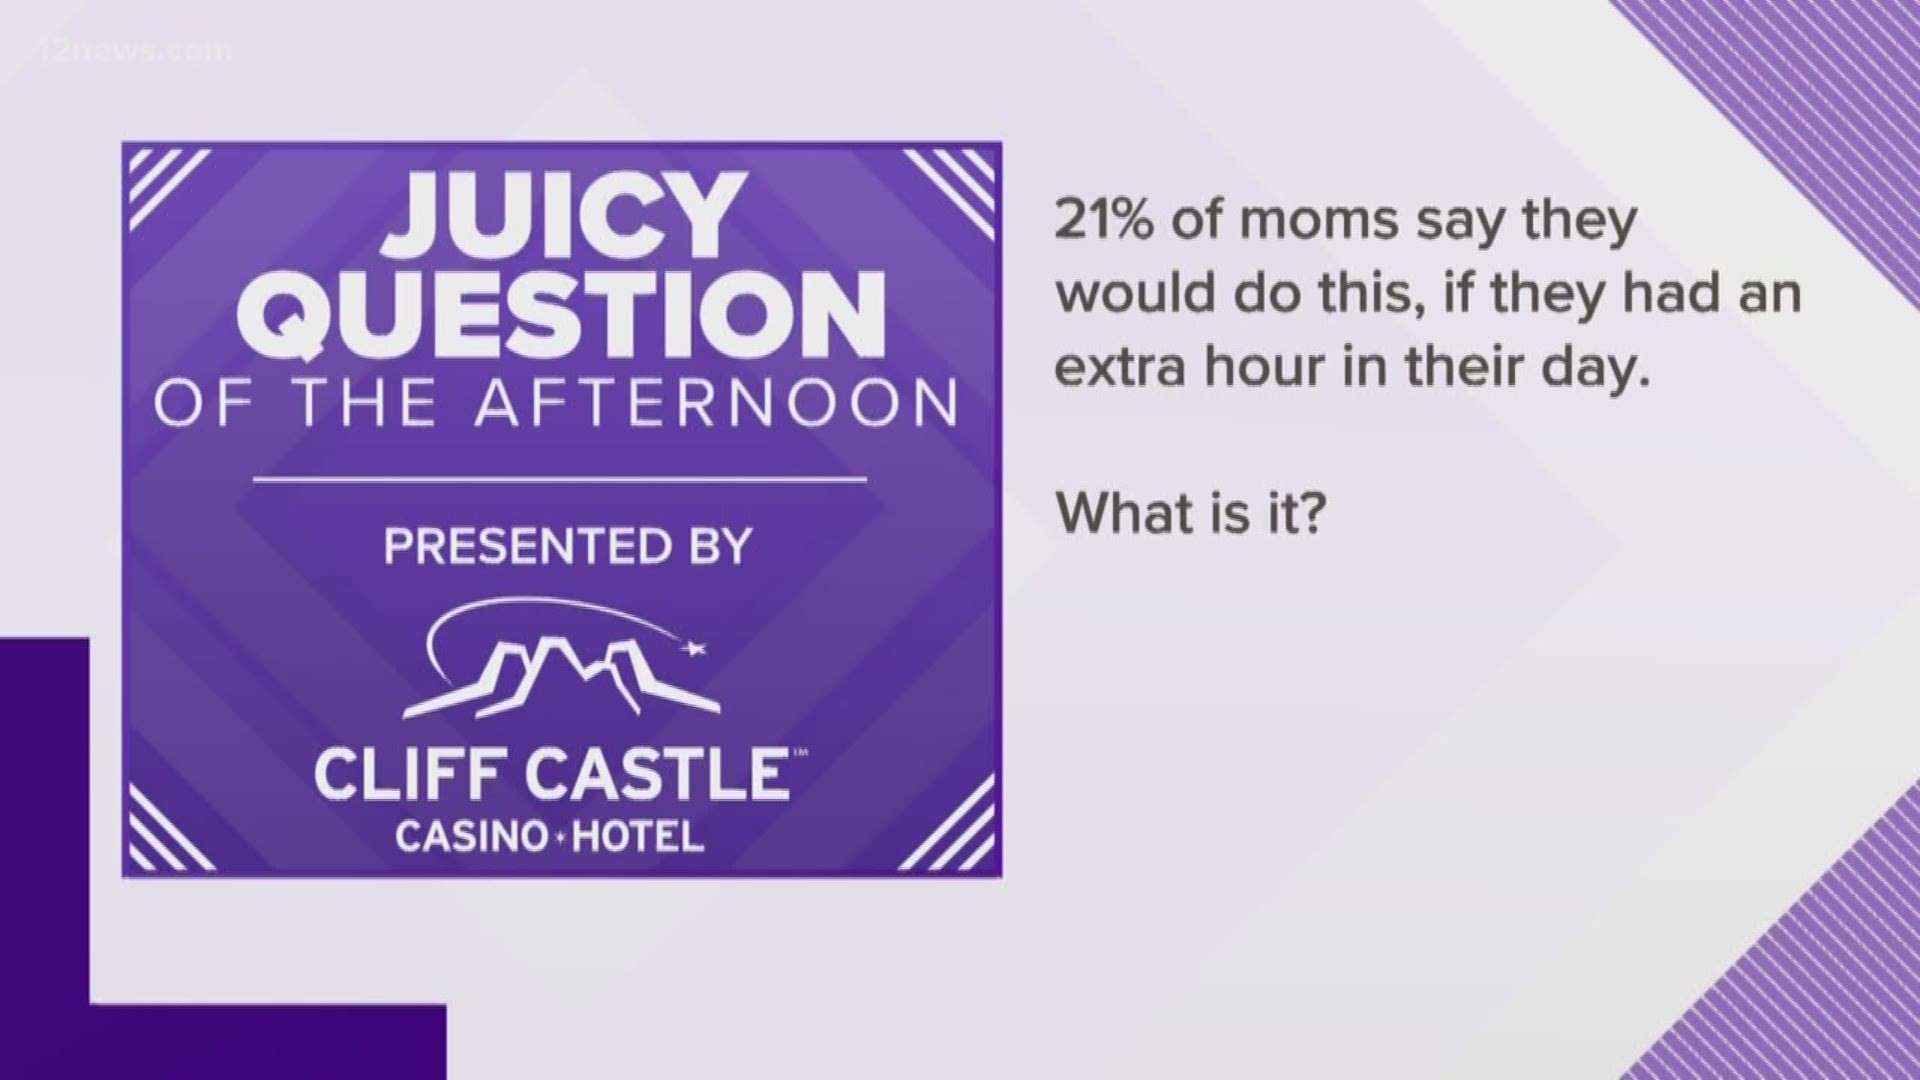 21% of moms say if they were given an extra hour every day they would do THIS. What is it?